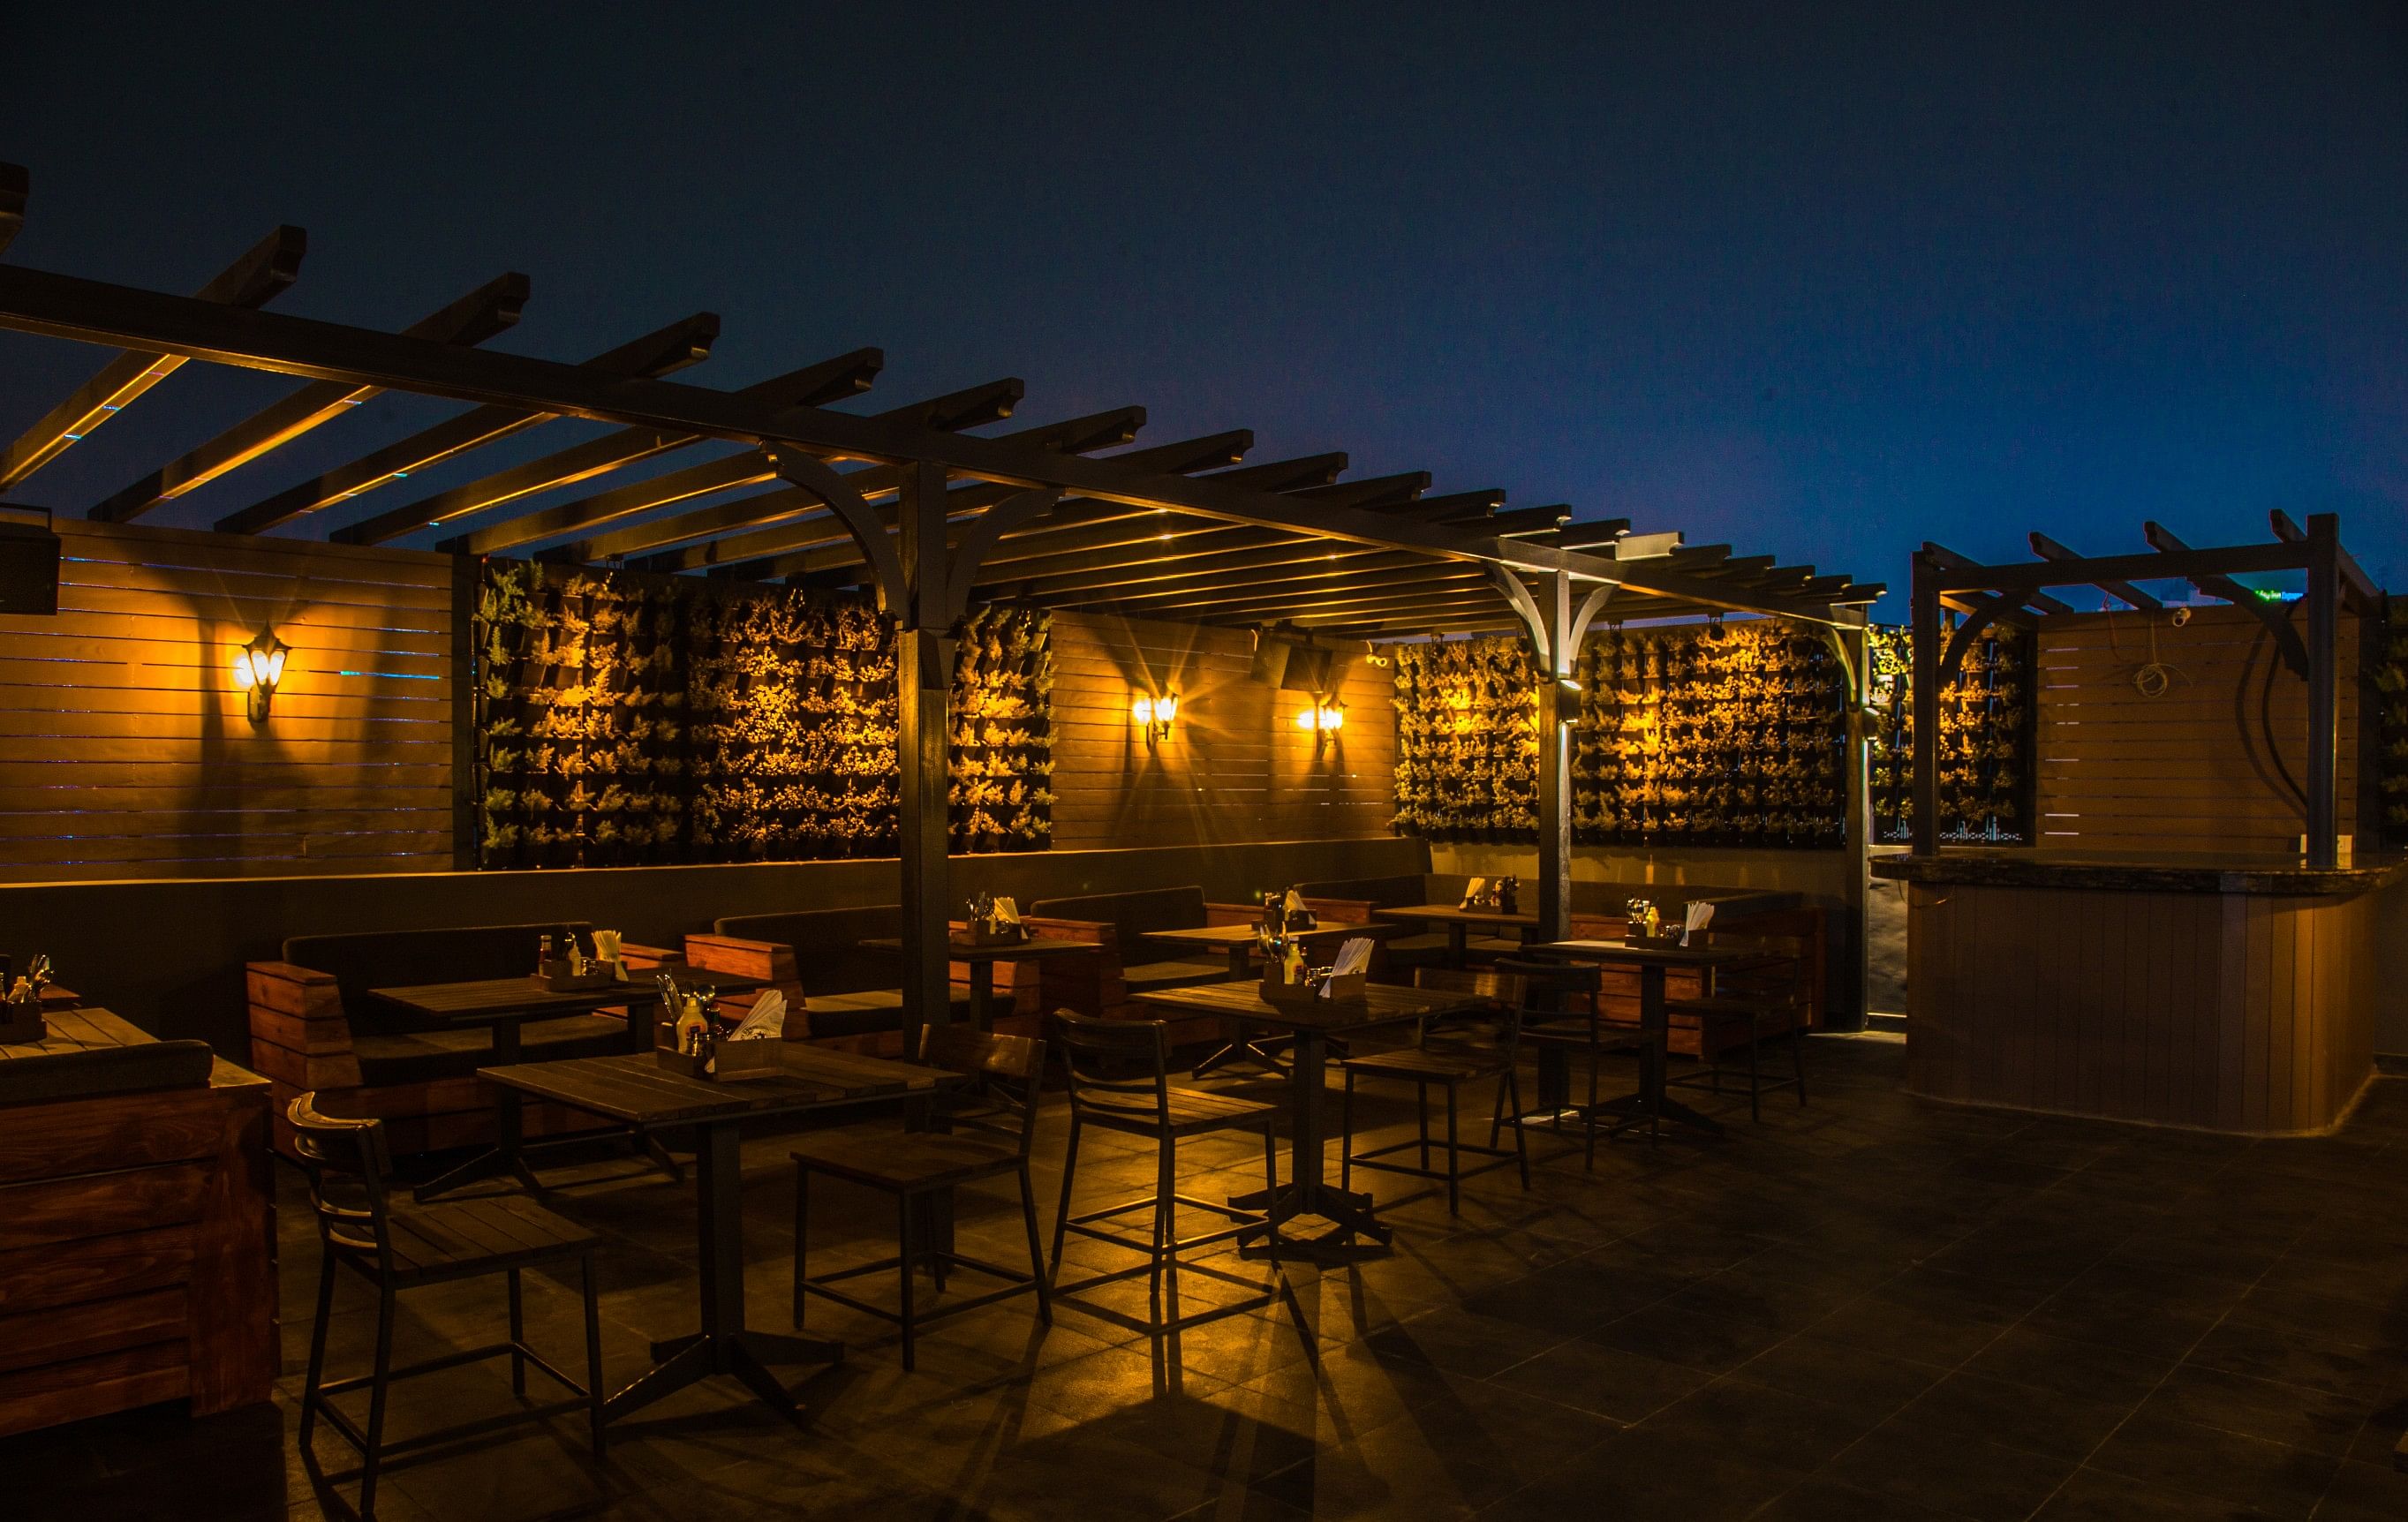 Brewocrat Brewery Skybar And Kitchen in Sector 47, Gurgaon